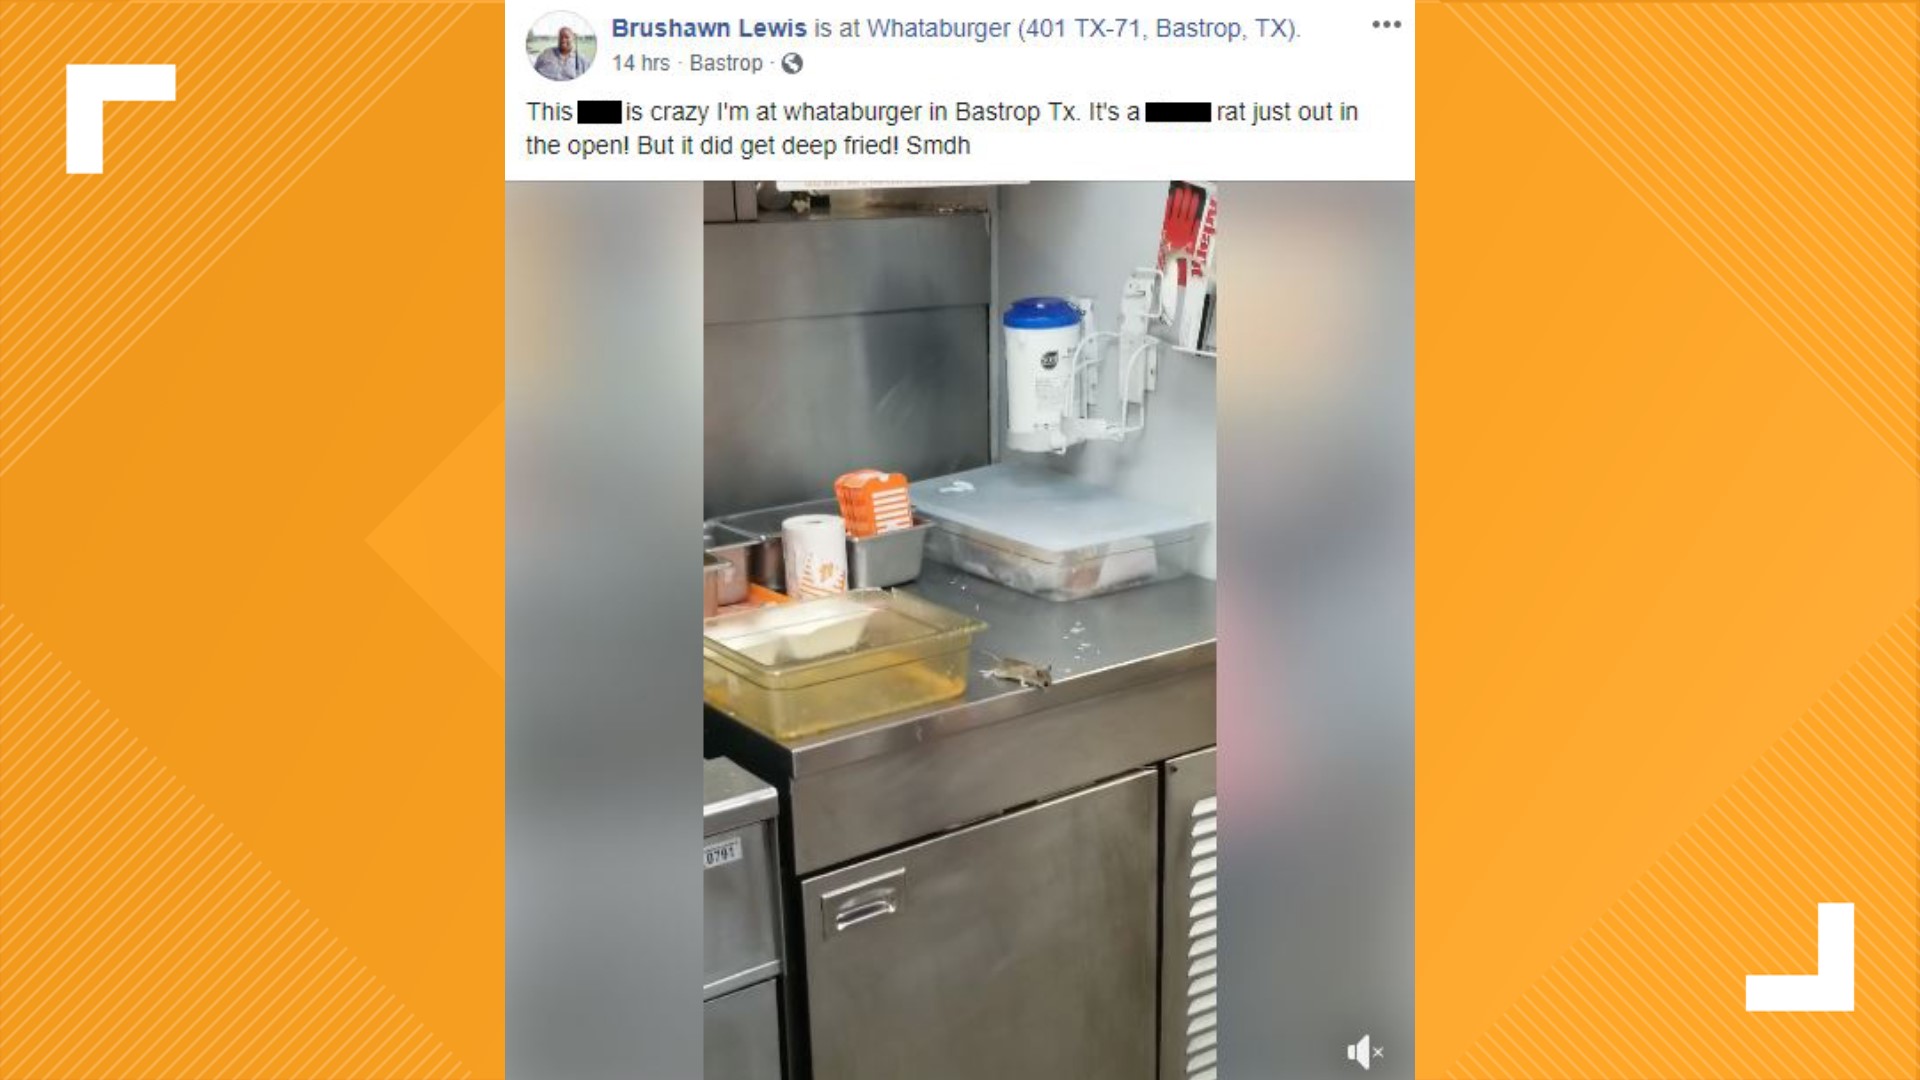 According to Whataburger, the location was closed and it has been cleaned and sanitized entirely.